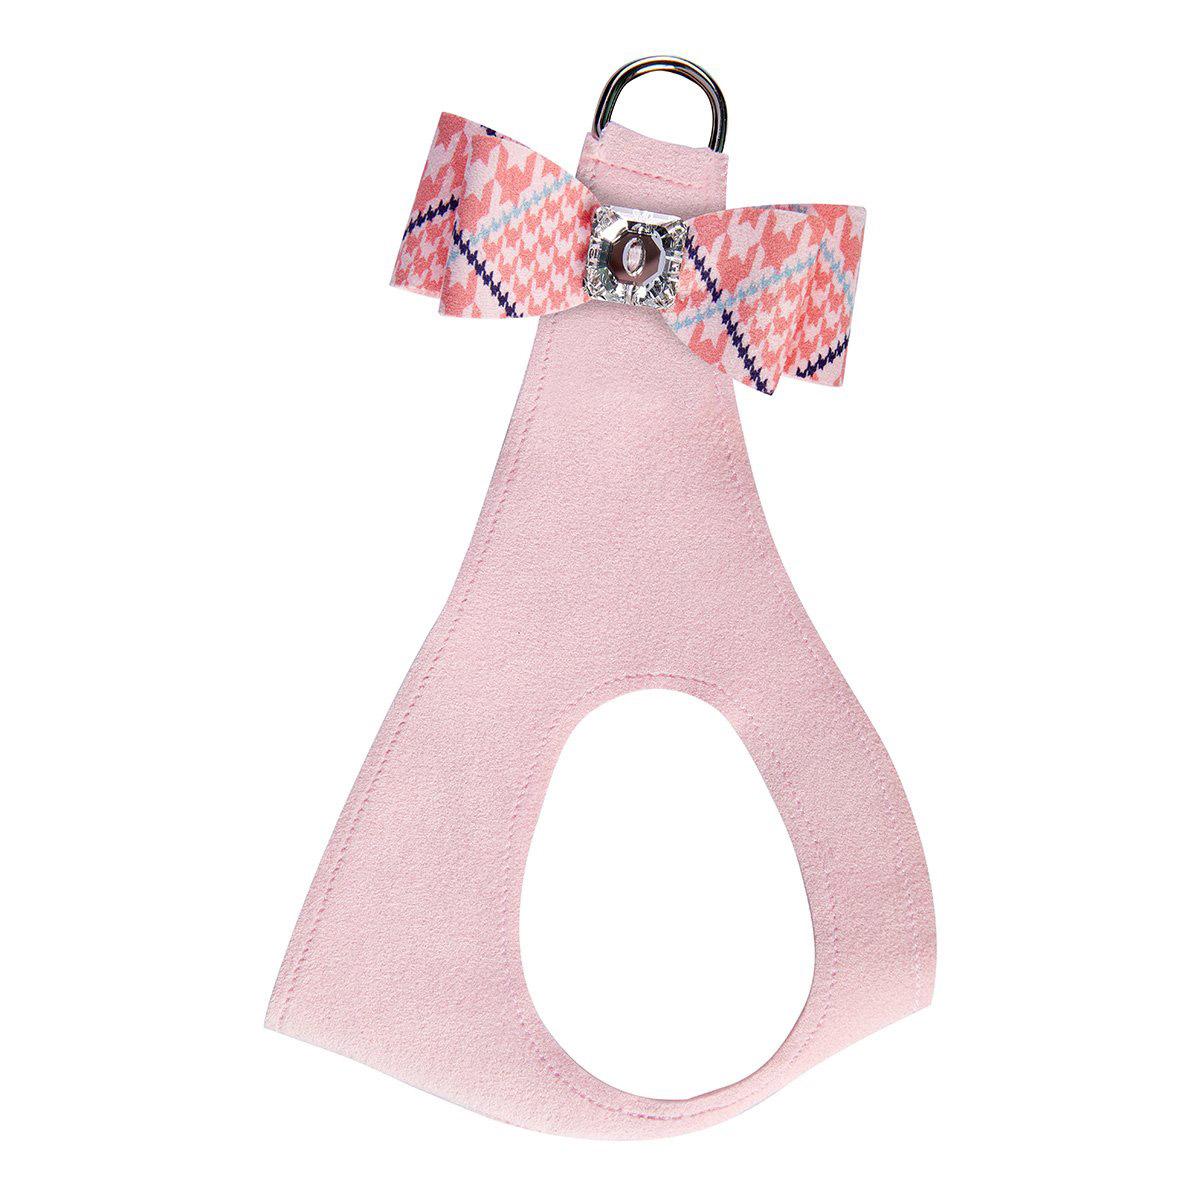 Peaches & Cream Glen Houndstooth Big Bow Step-In Dog Harness by Susan Lanci - Puppy Pink